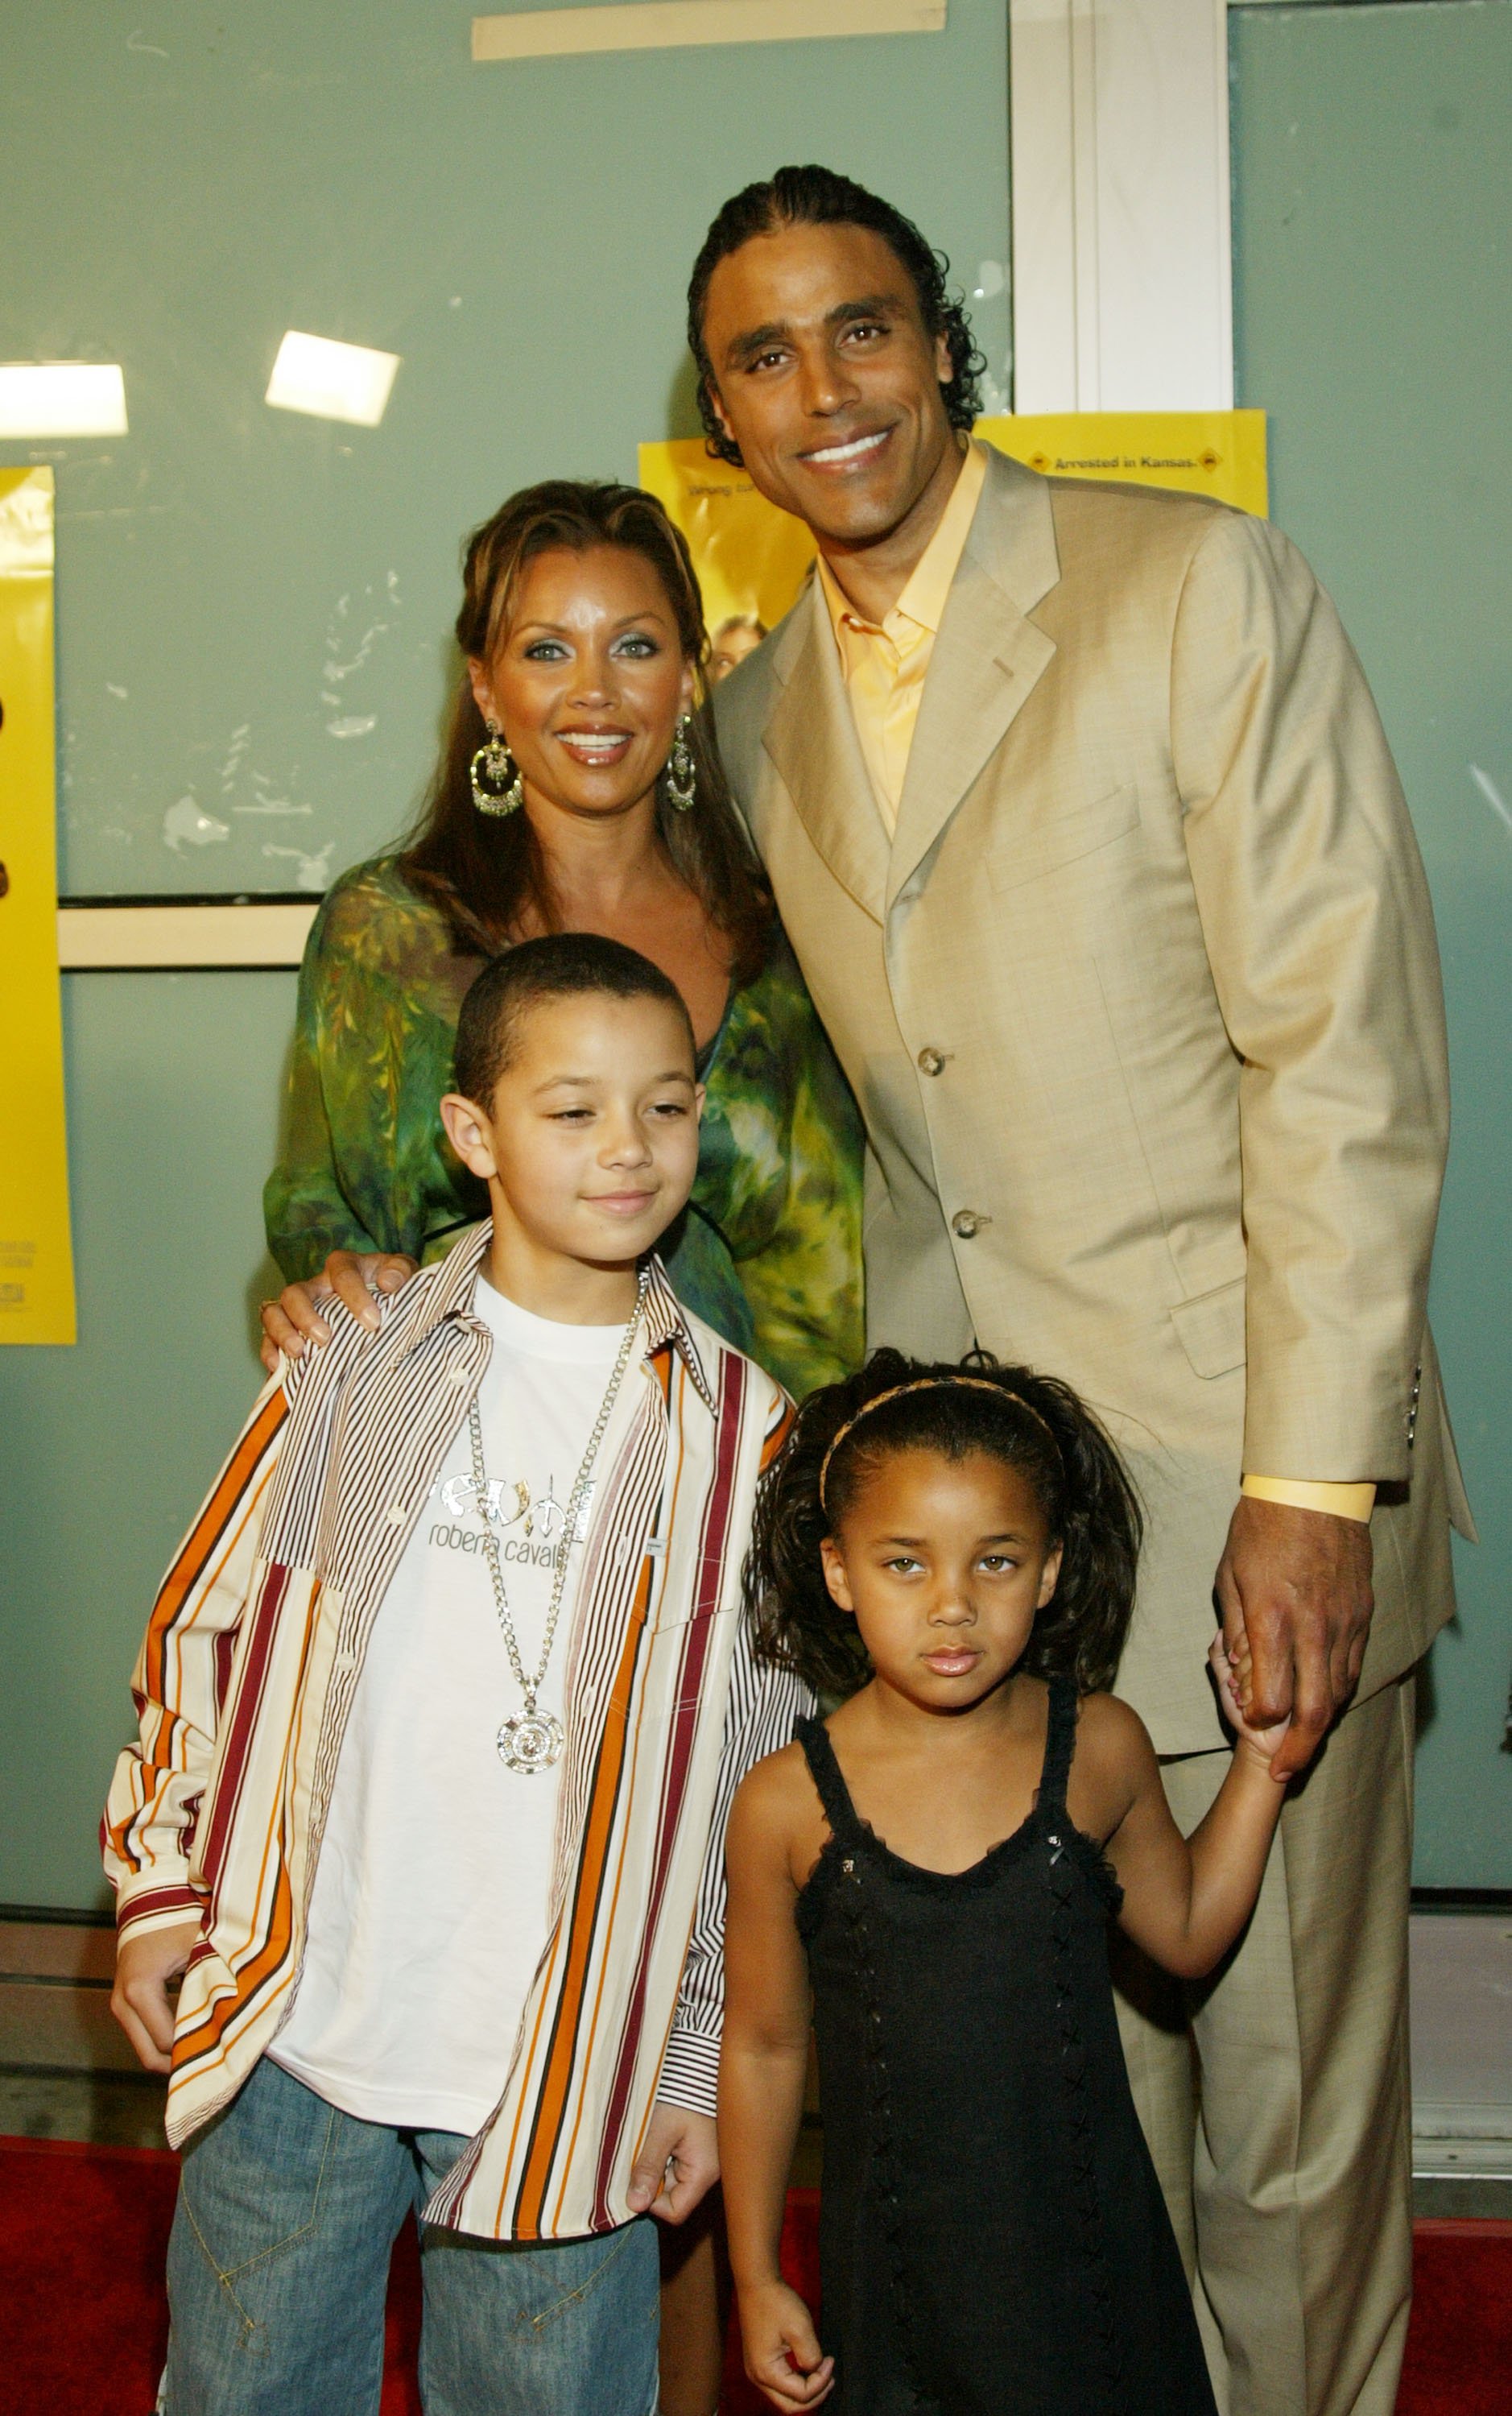 Vanessa Williams and Rick Fox with their children arrive for the premier of "Johnson Family Vacation" at the Cinerama Dome on March 31, 2004. | Photo: Getty Images